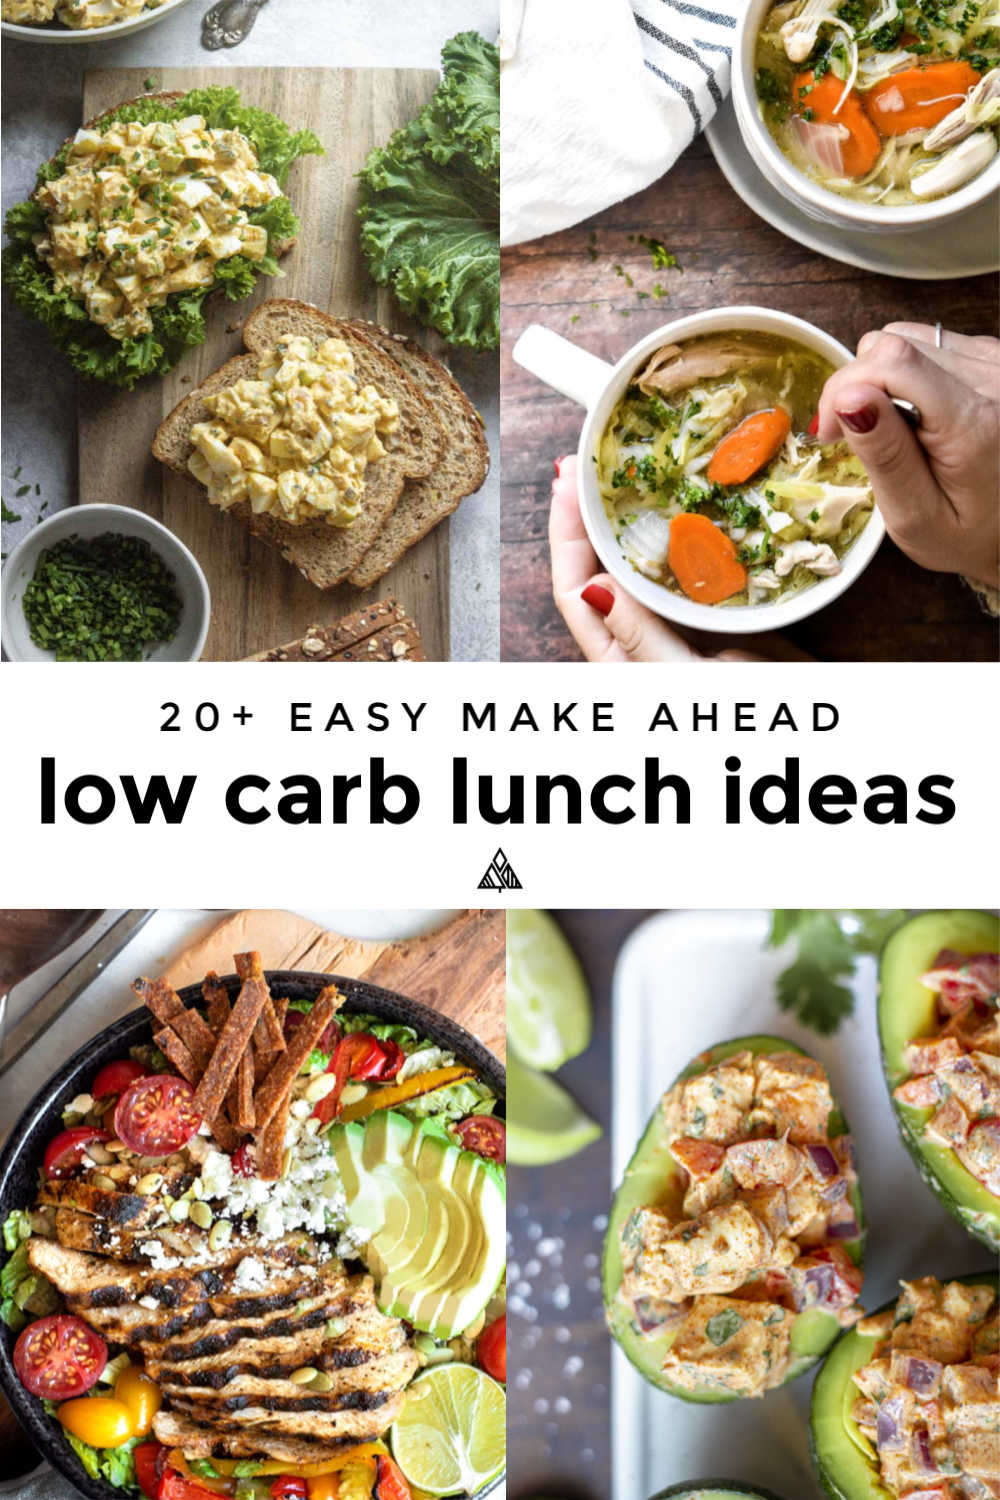 The top 15 Ideas About Low Carb Lunch Recipes